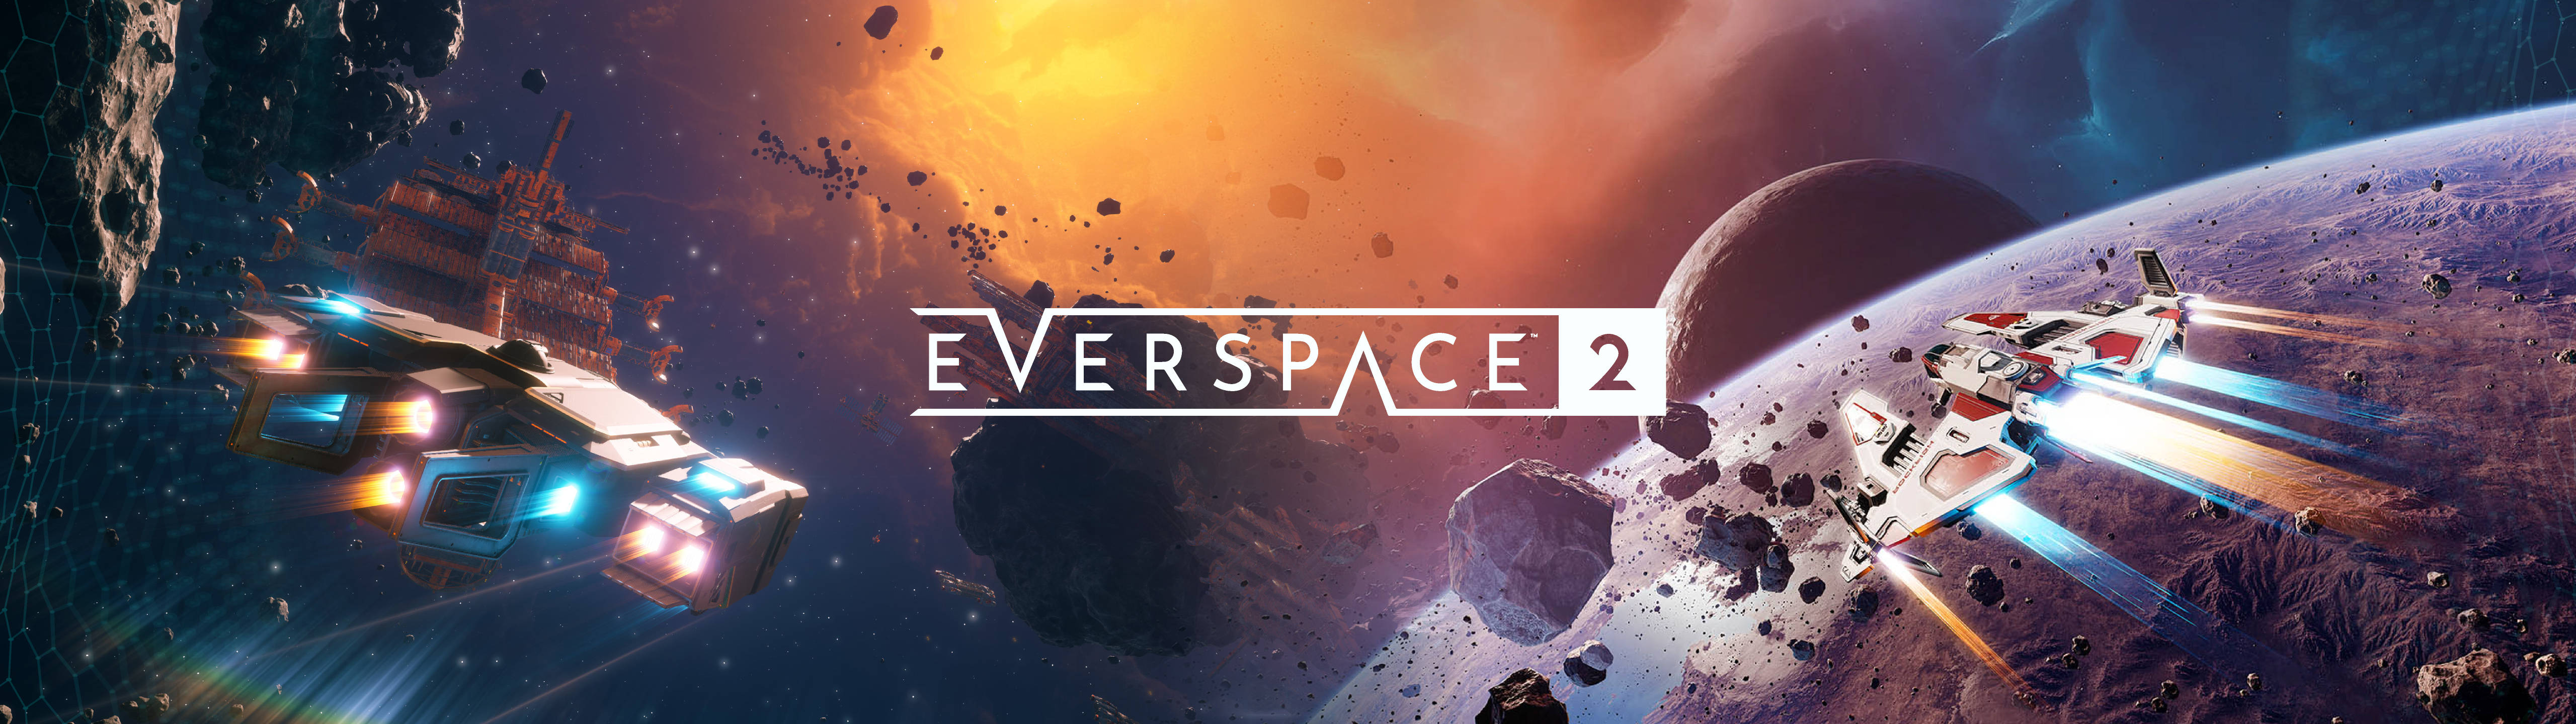 Everspace 2 5120x1440 Gaming Landscape